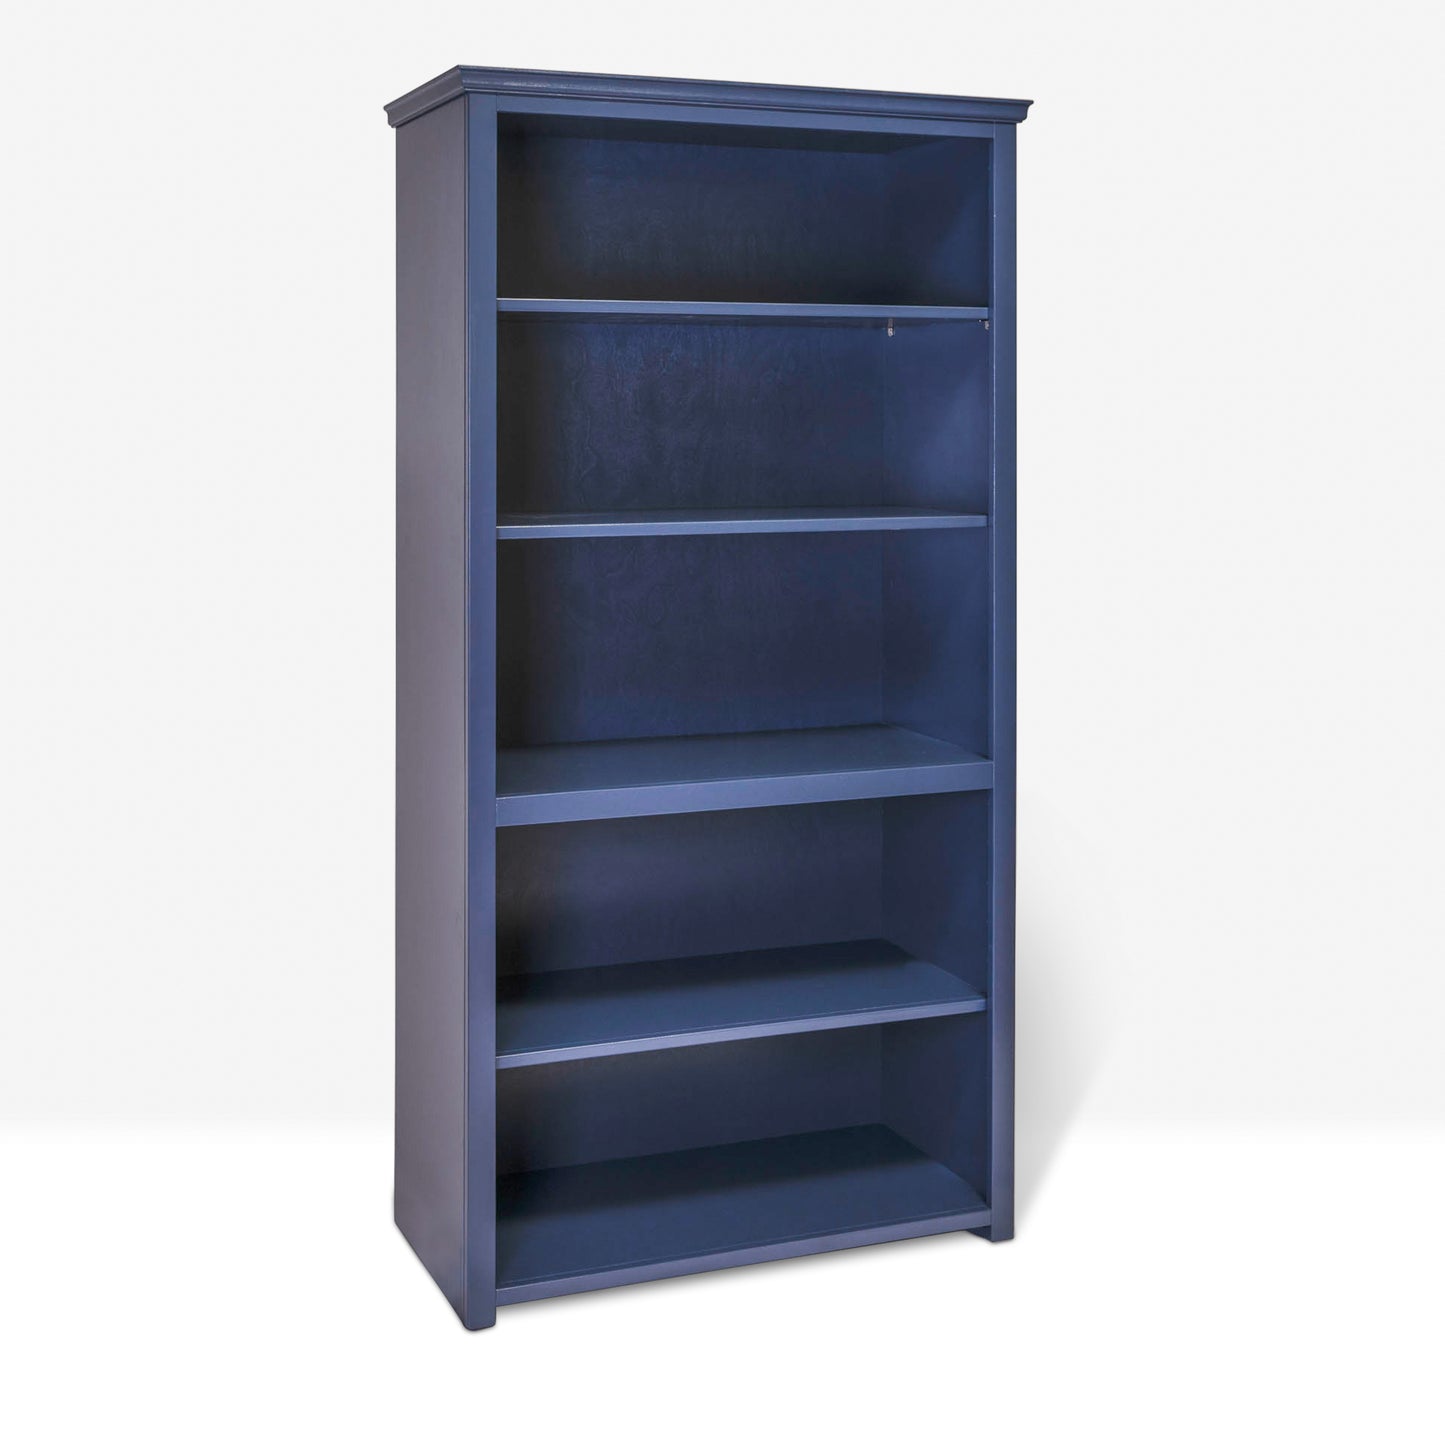 Berkshire Plymouth Bookcase shown in Hale Navy finish with adjustable birch shelves.